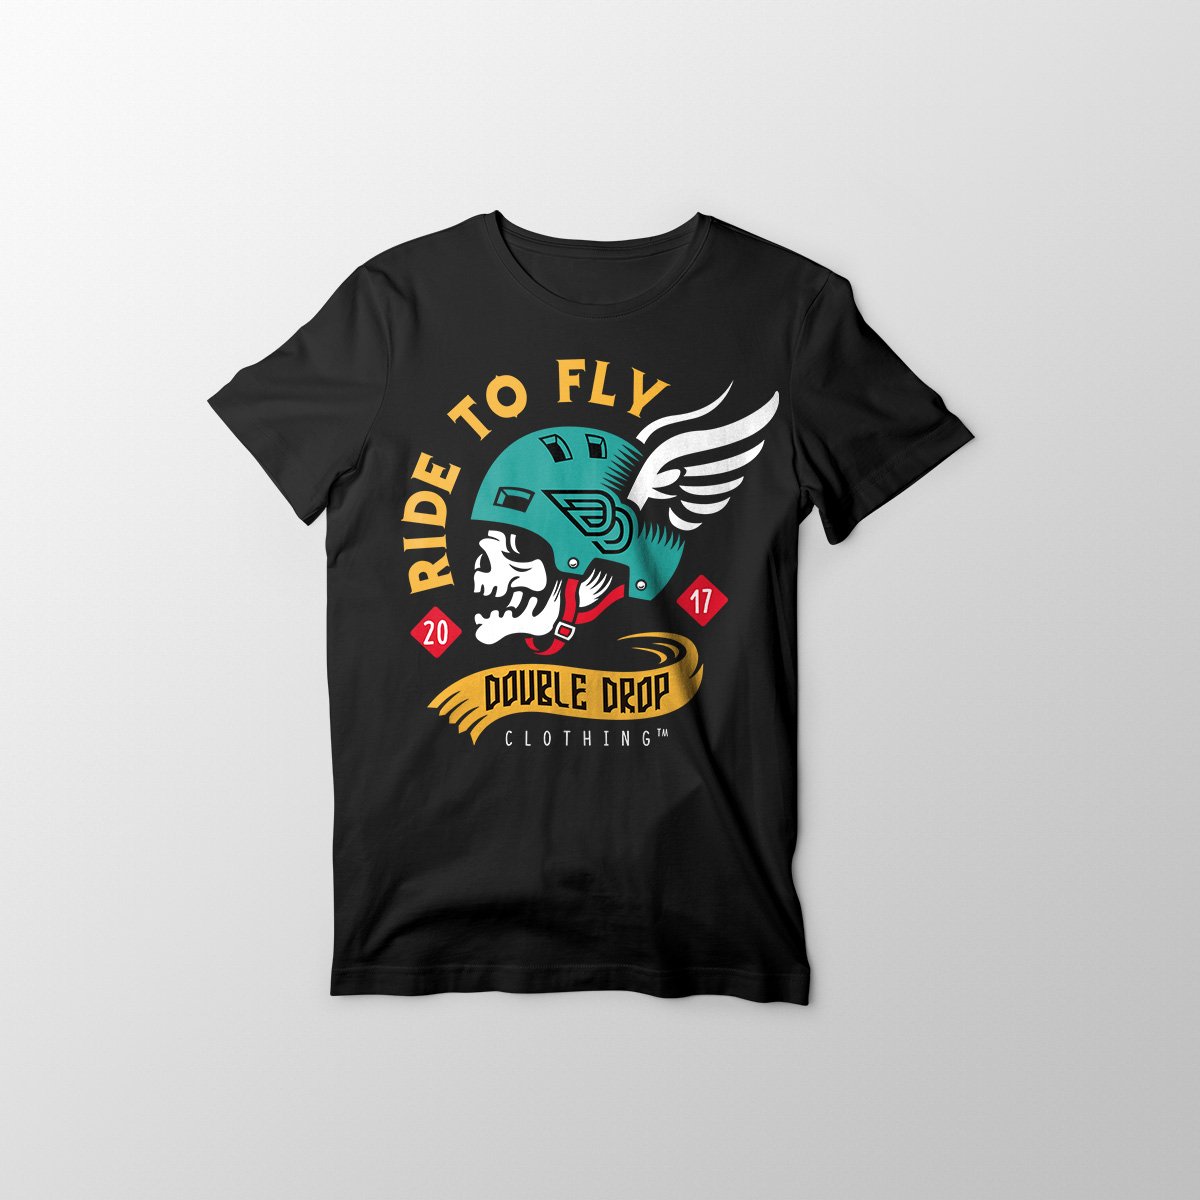 Download Ride to Fly - Women's Black T-Shirt - Double Drop Clothing Ltd